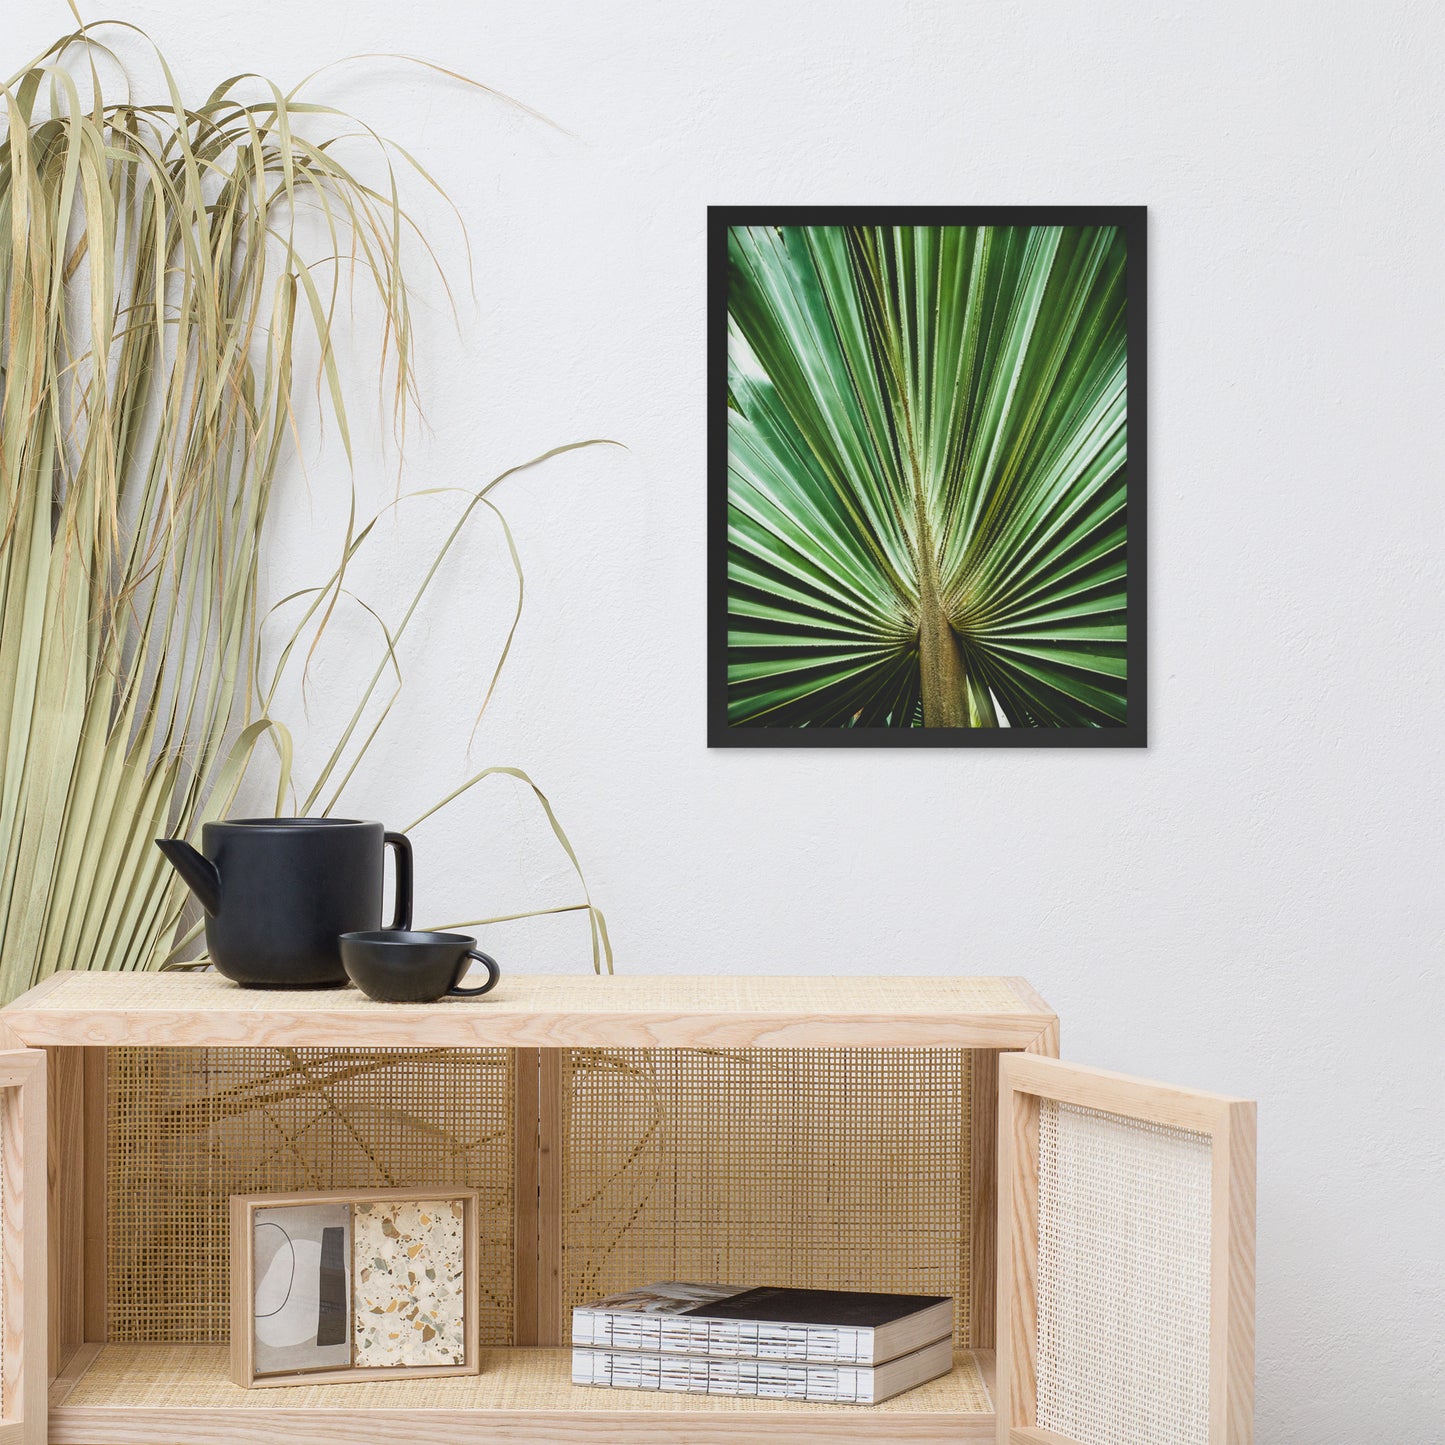 Framed Wall Art For Dining Room: Aged and Colorized Wide Palm Leaves 2 Tropical Botanical / Nature Photo Framed Wall Art Print - Artwork - Wall Decor